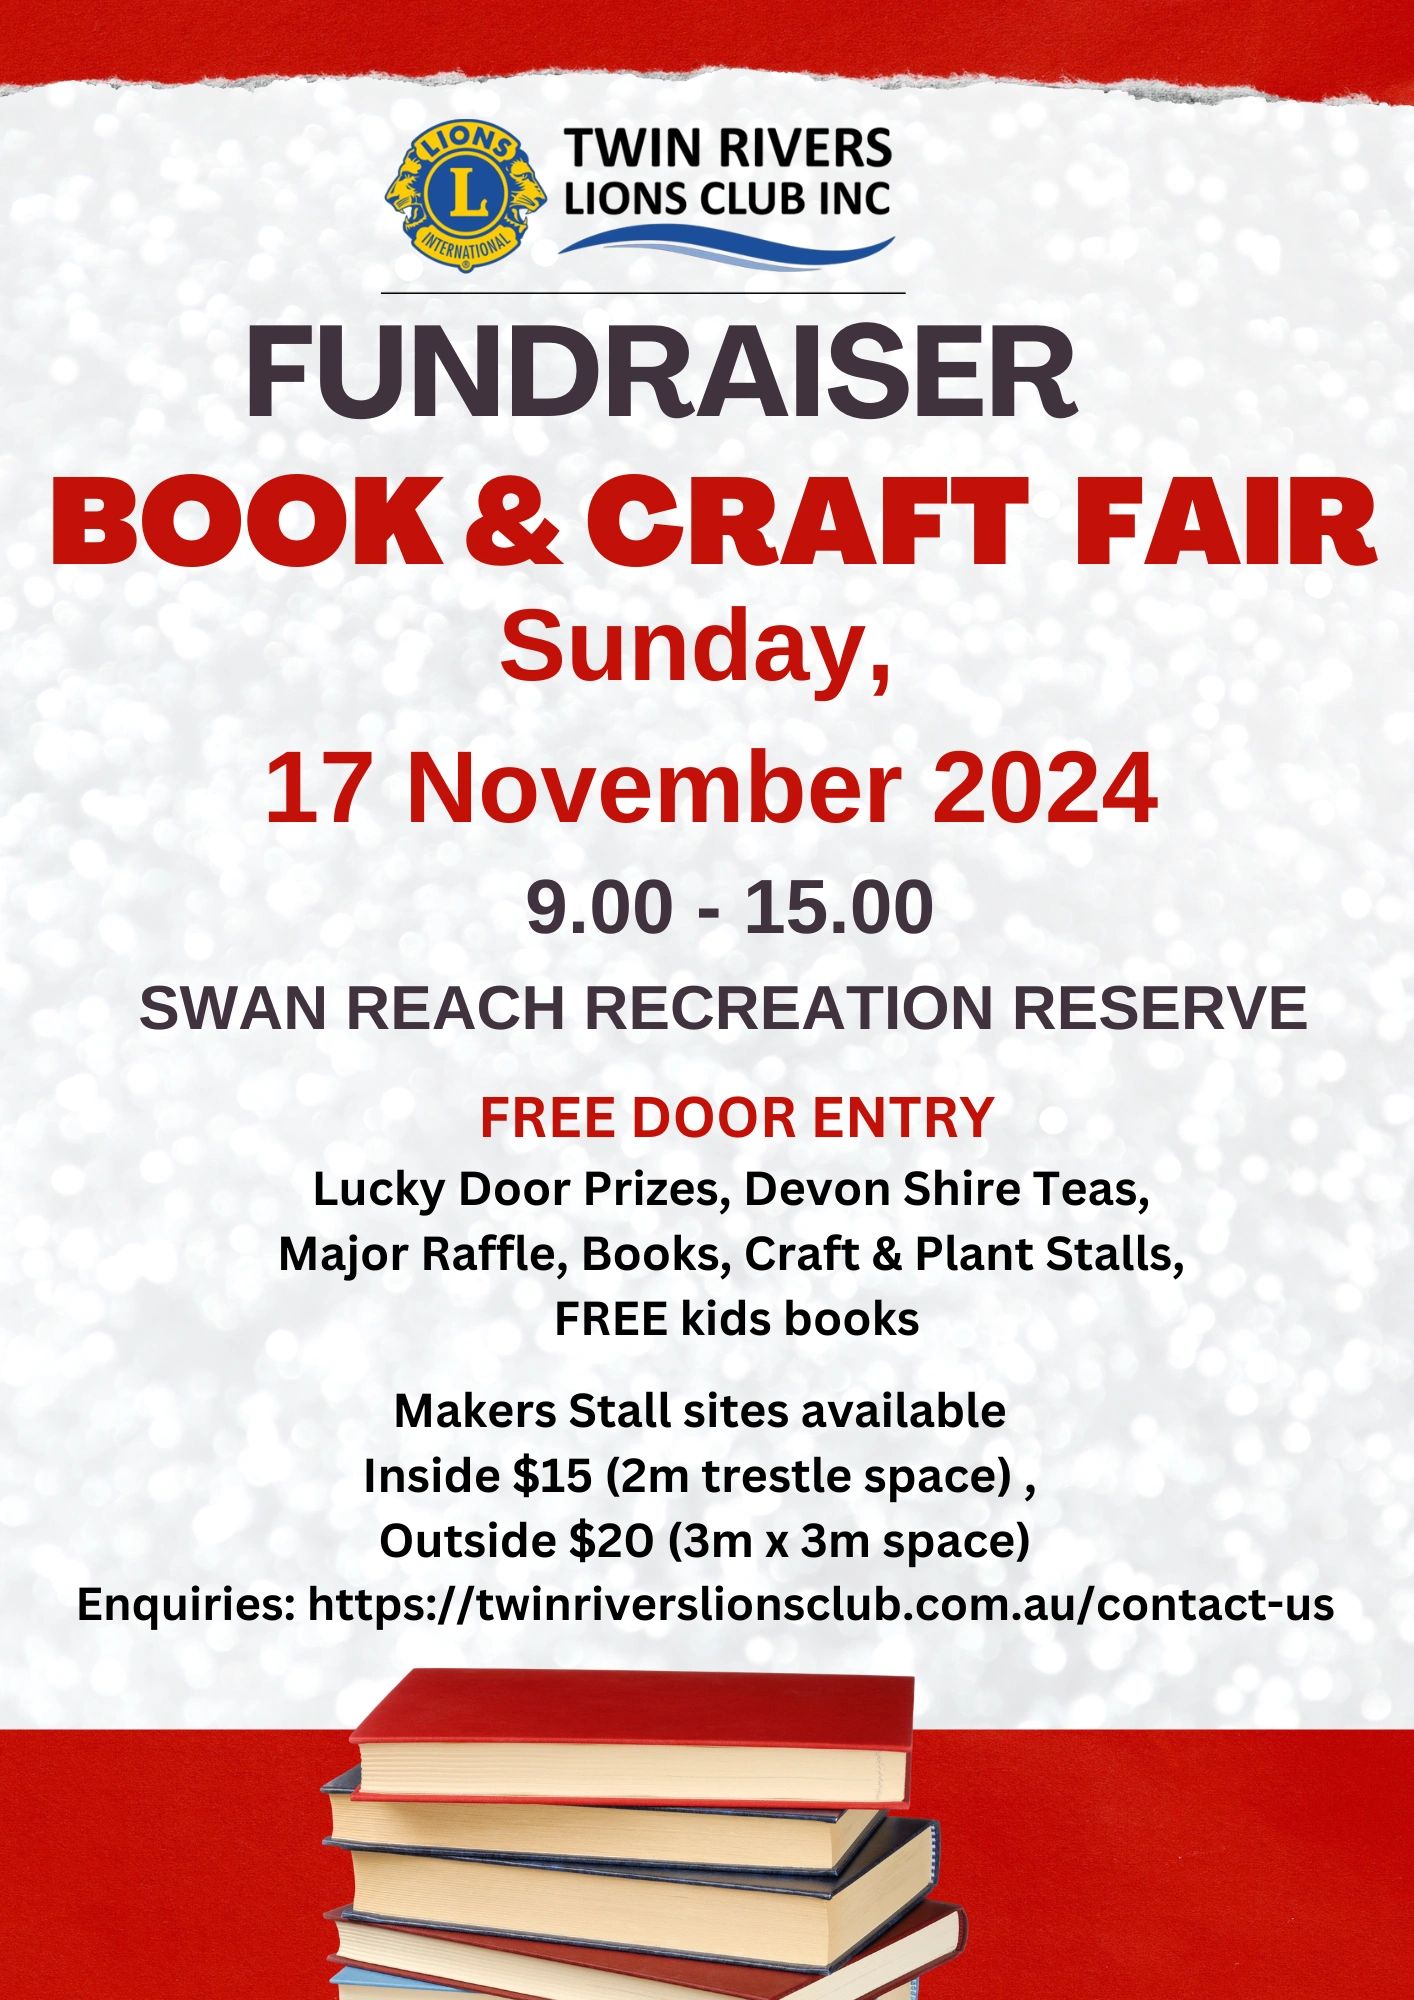 Book & Craft Fair hosted by Twin Rivers Lions Club Inc as a fundraising event.  Venue Swan Reach Rec